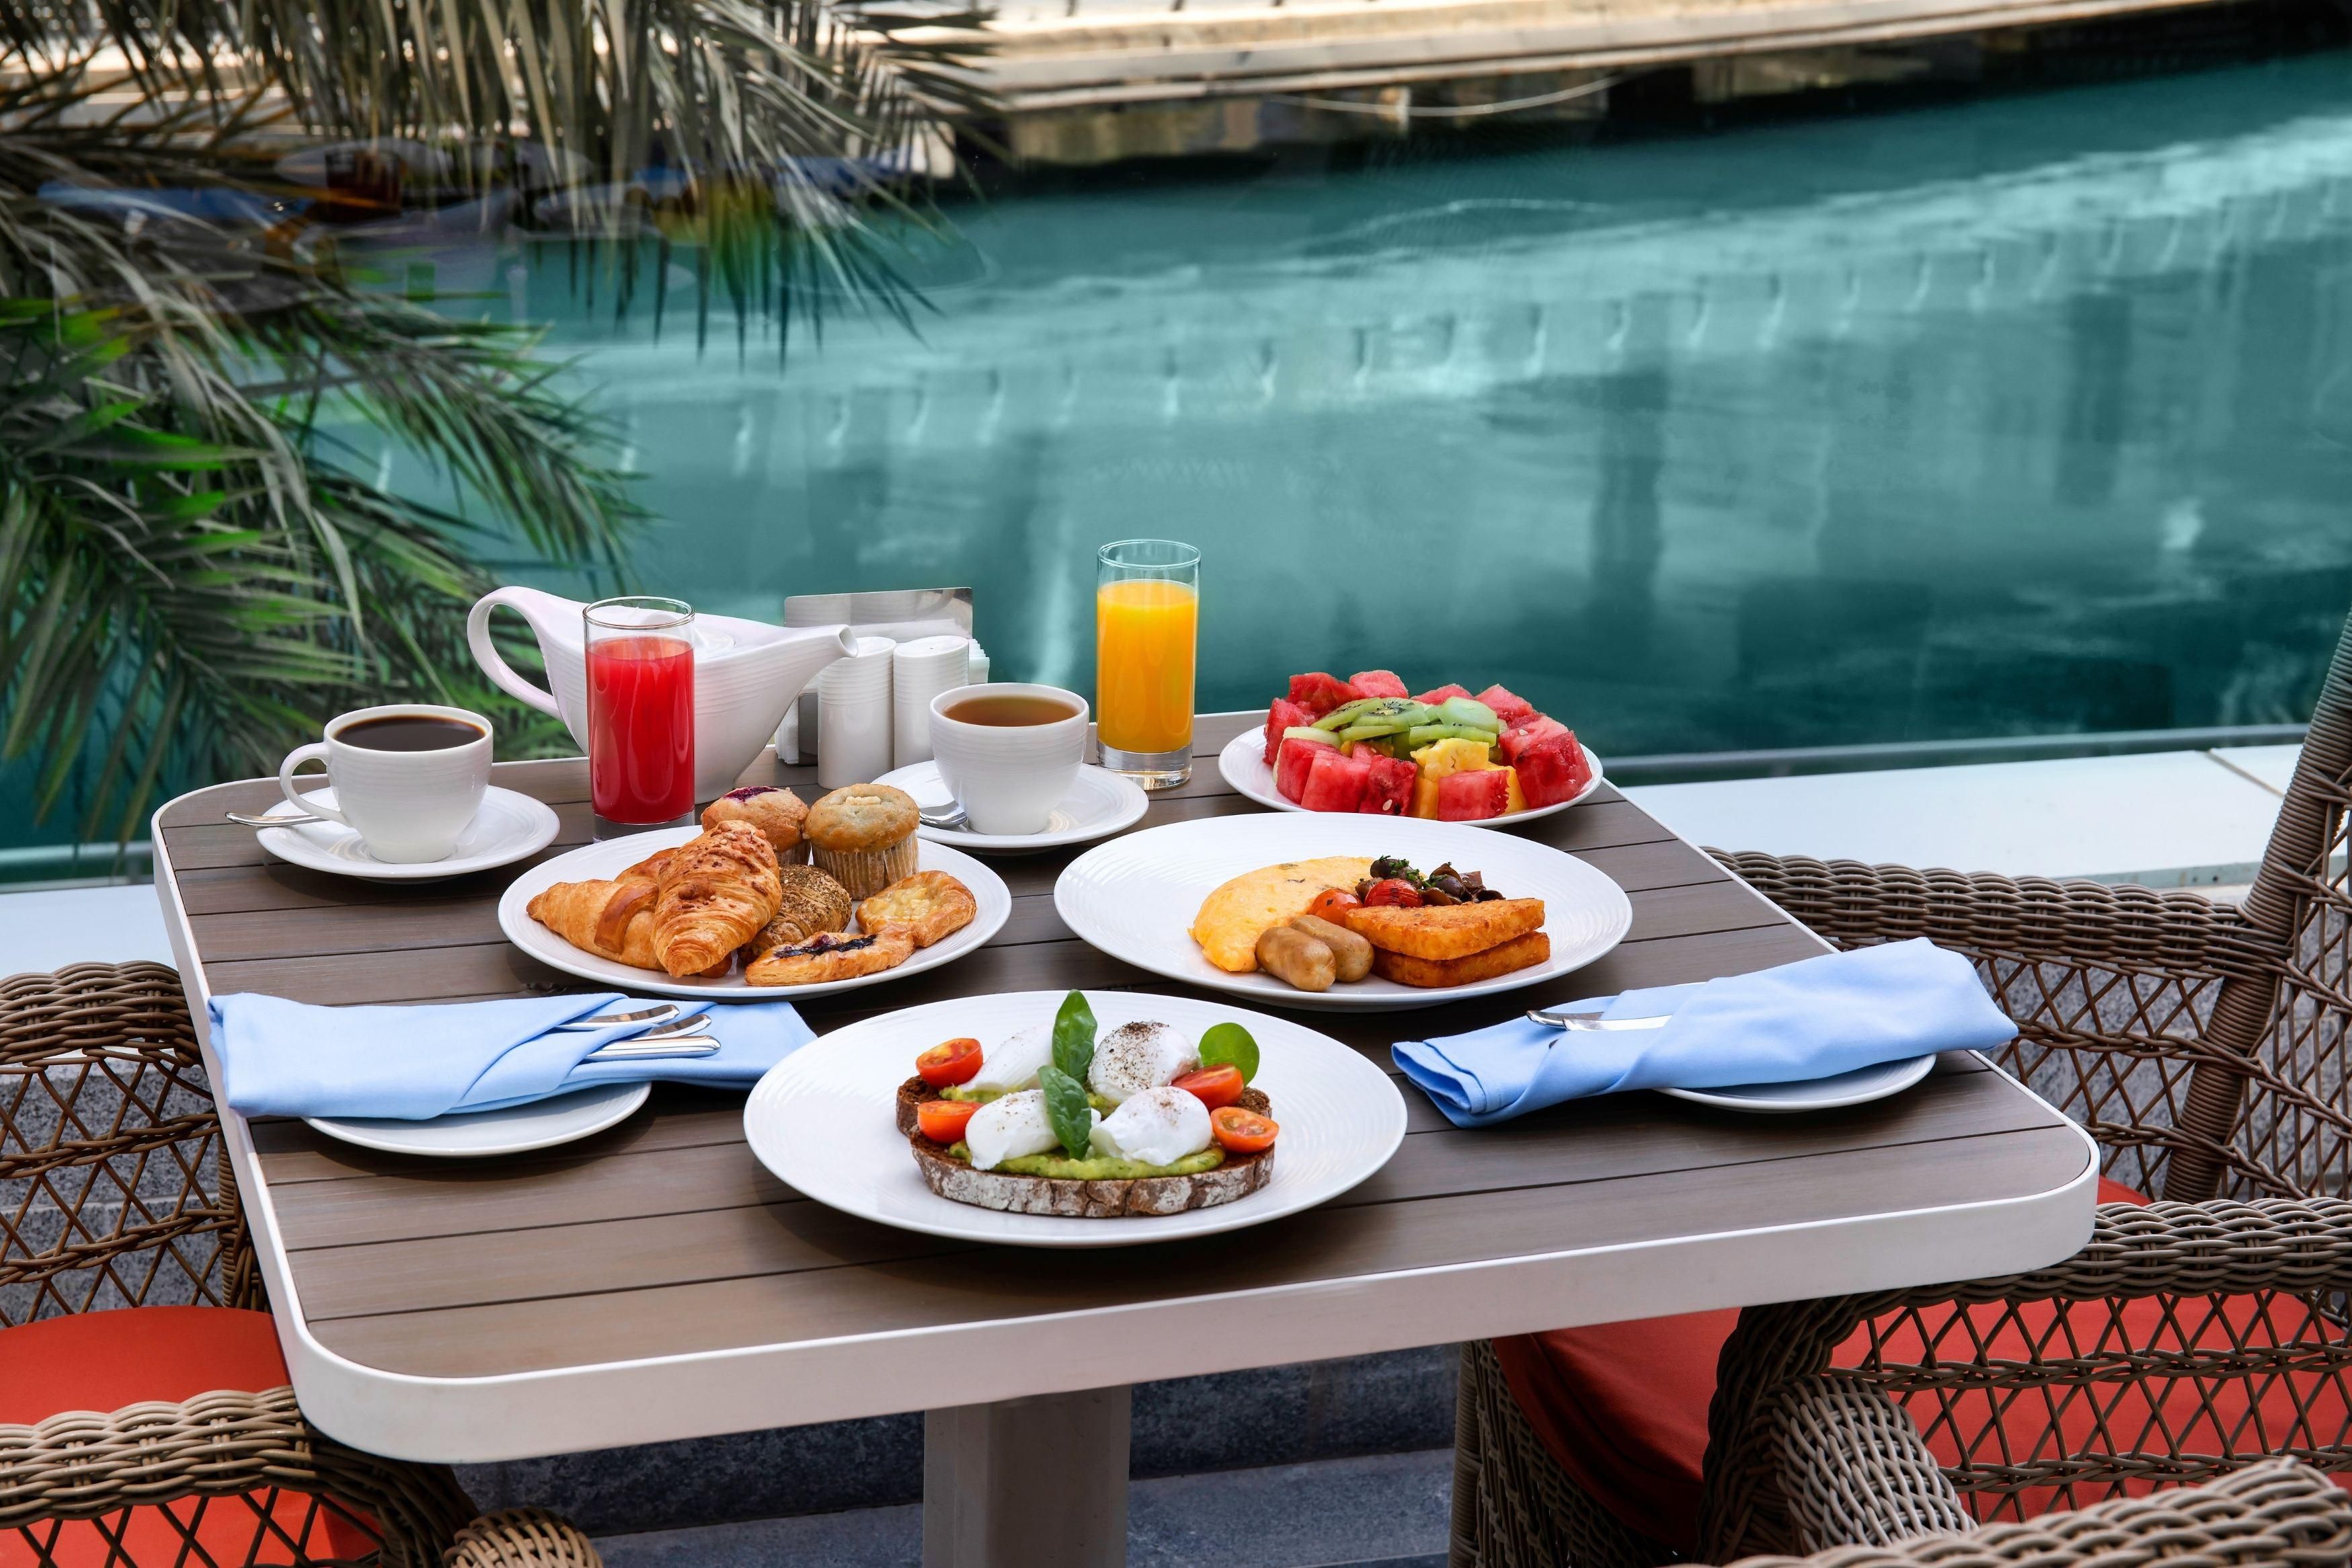 Breakfast at Lo+Cale Terrace overlooking the Marina